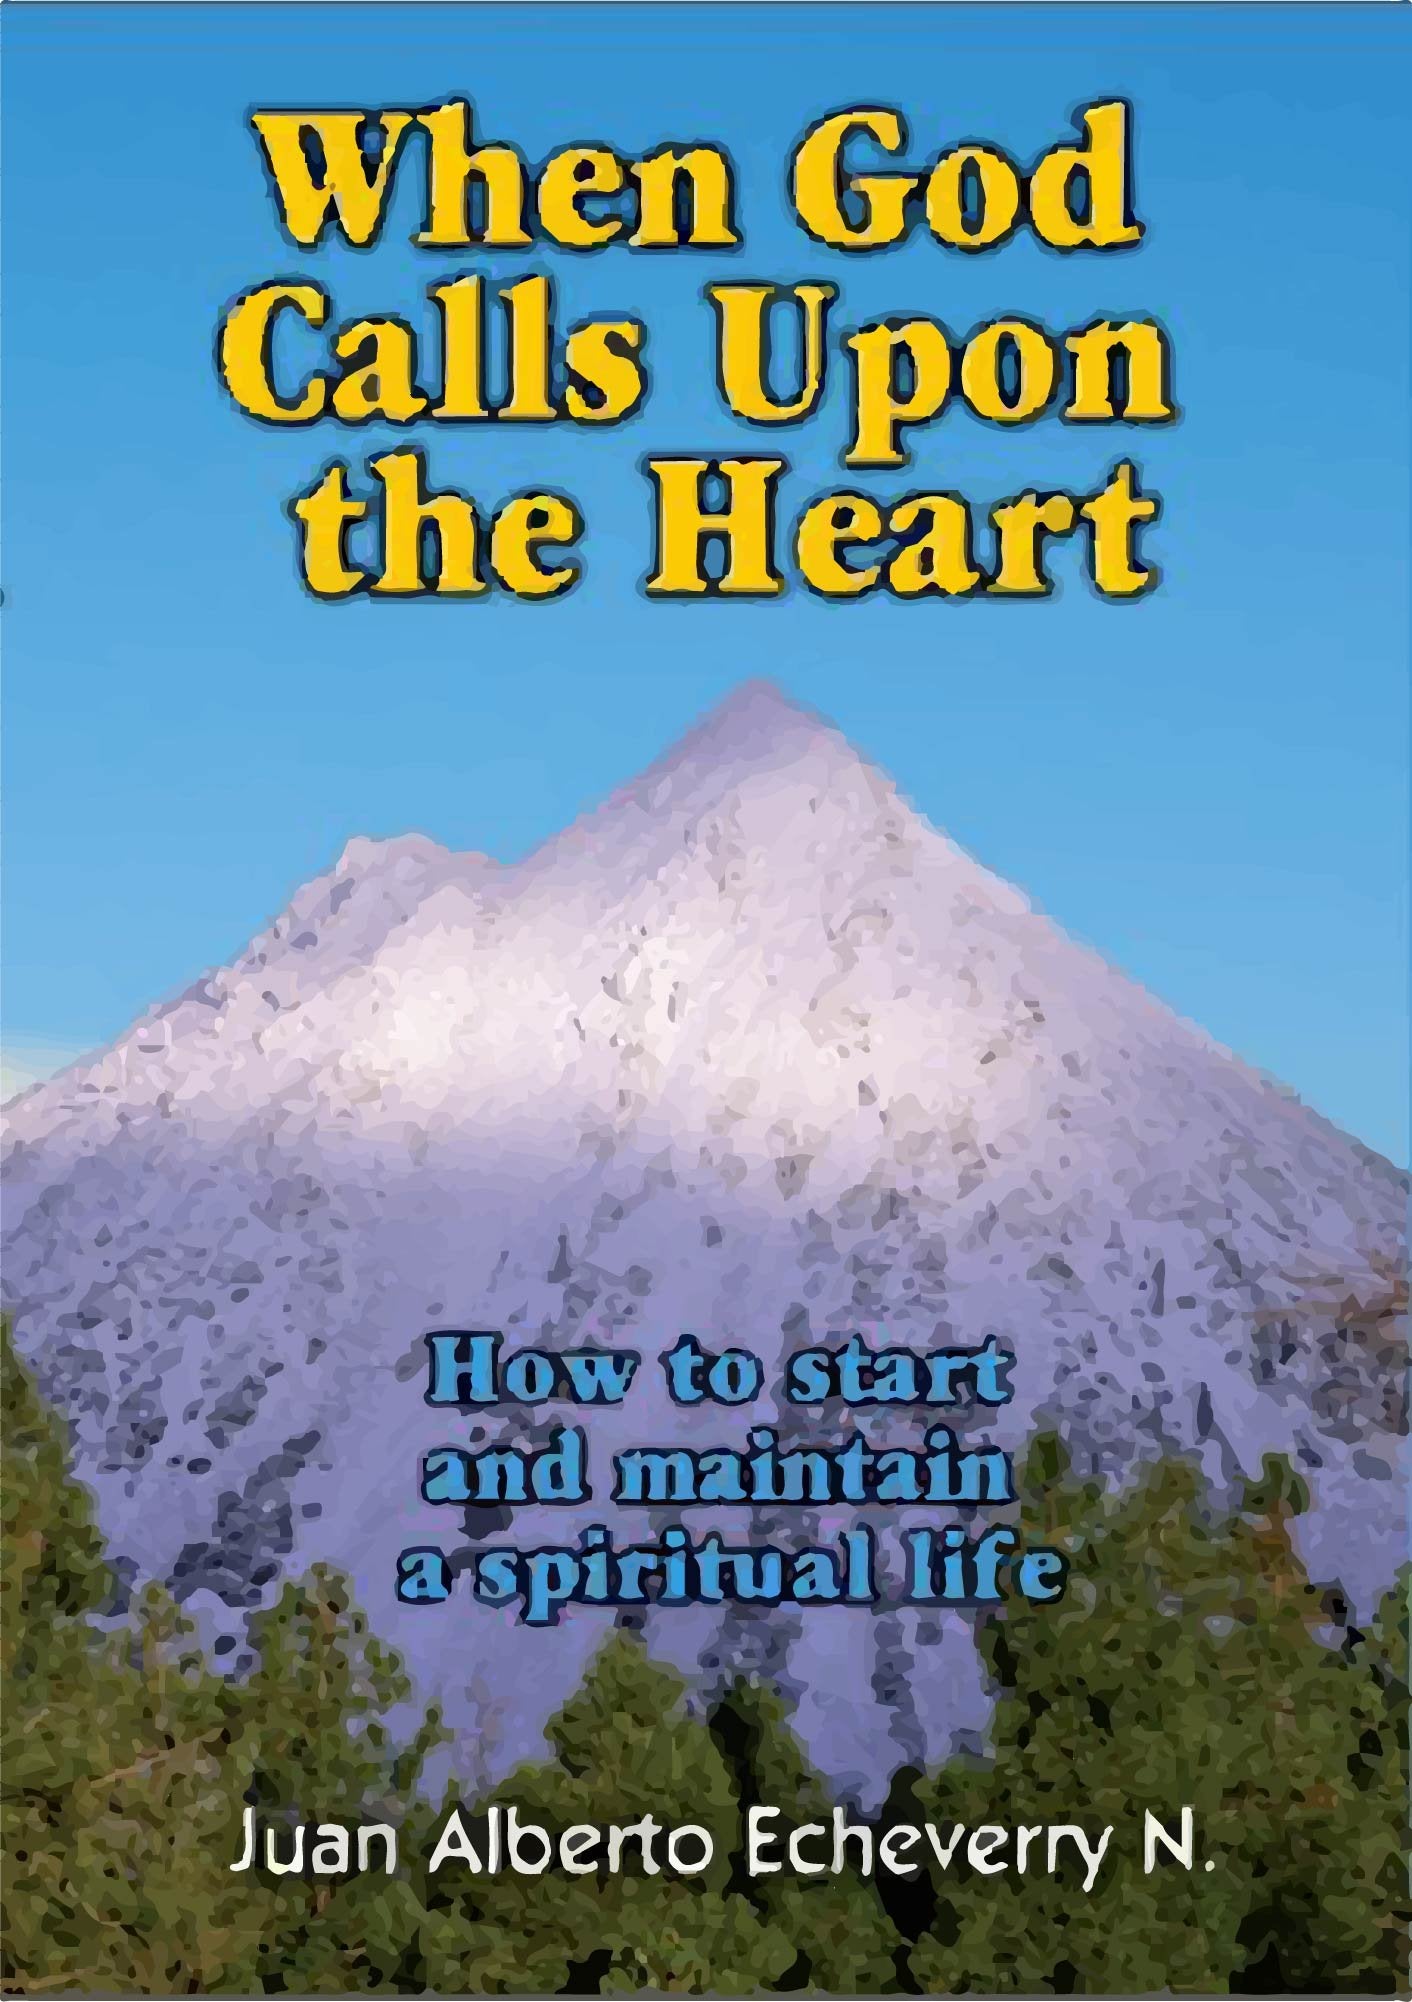 In Santa María del Monte, our goal is to evangelize and our products help us to do so, that is why we present you this book  that allows you to make your own decisions in a free environment to start and maintain a spiritual life. Find it in our books section and help us carry the message of Christ.  Our products speak for themselves